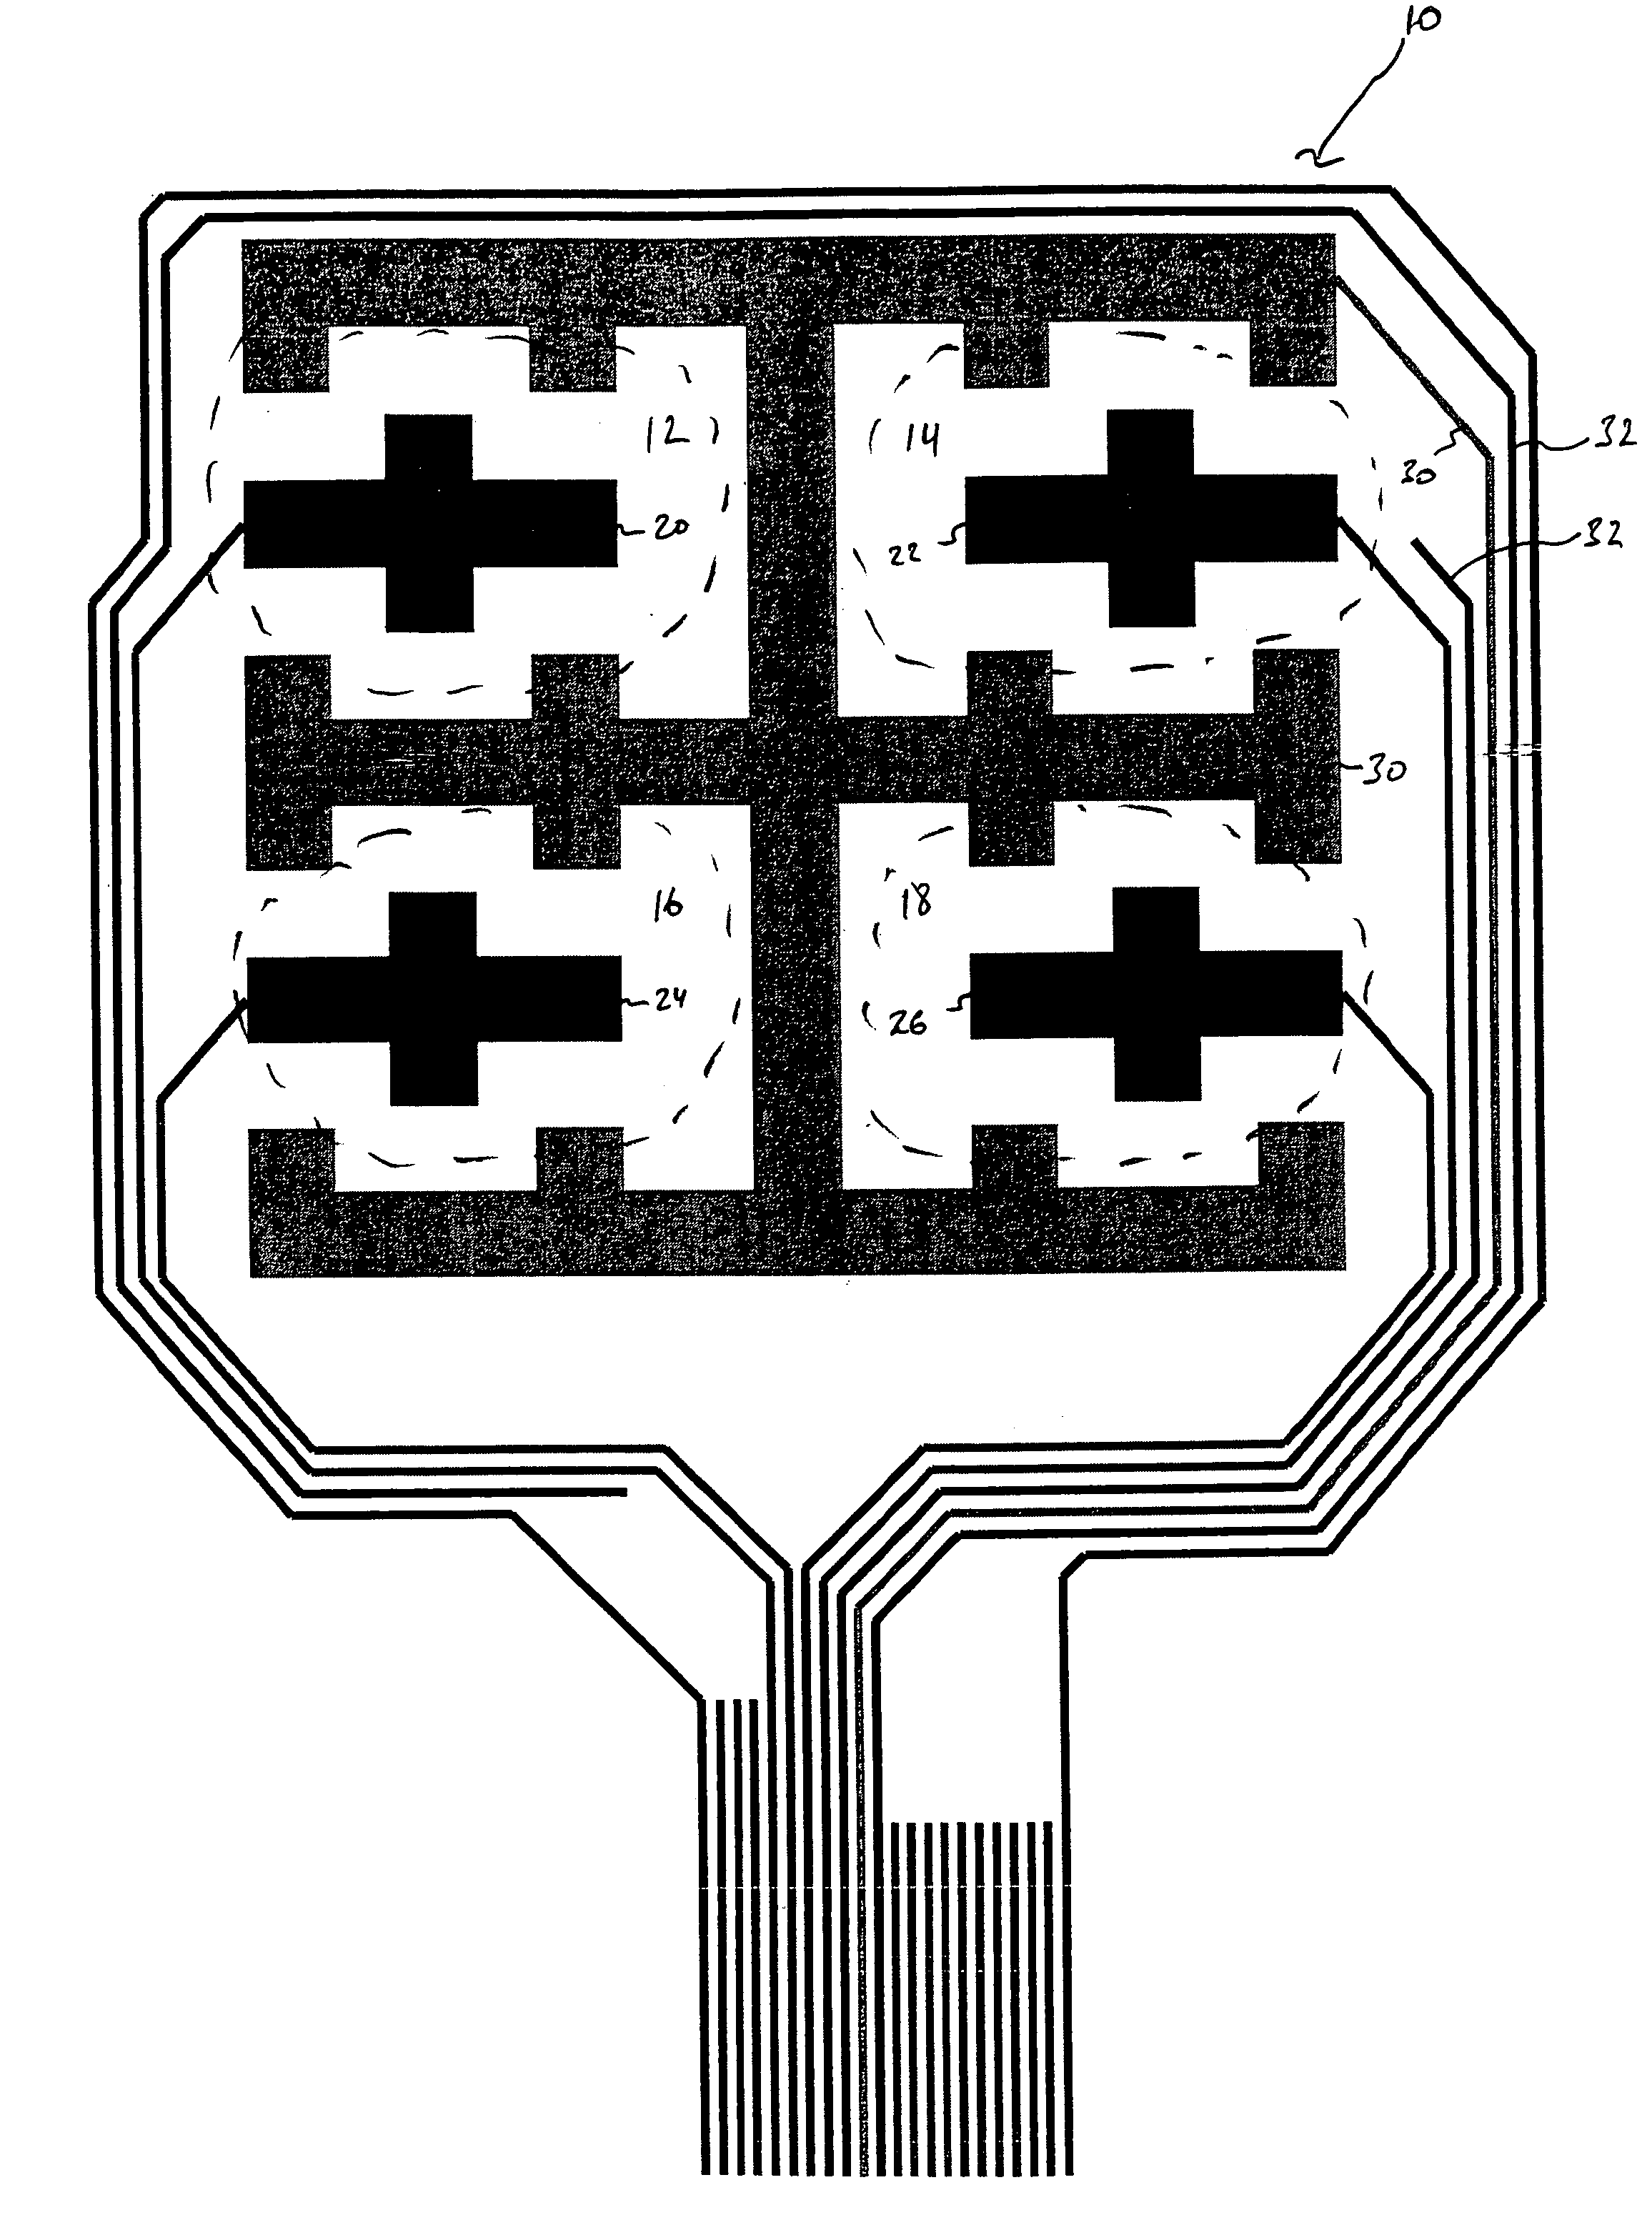 Single-layer touchpad having touch zones